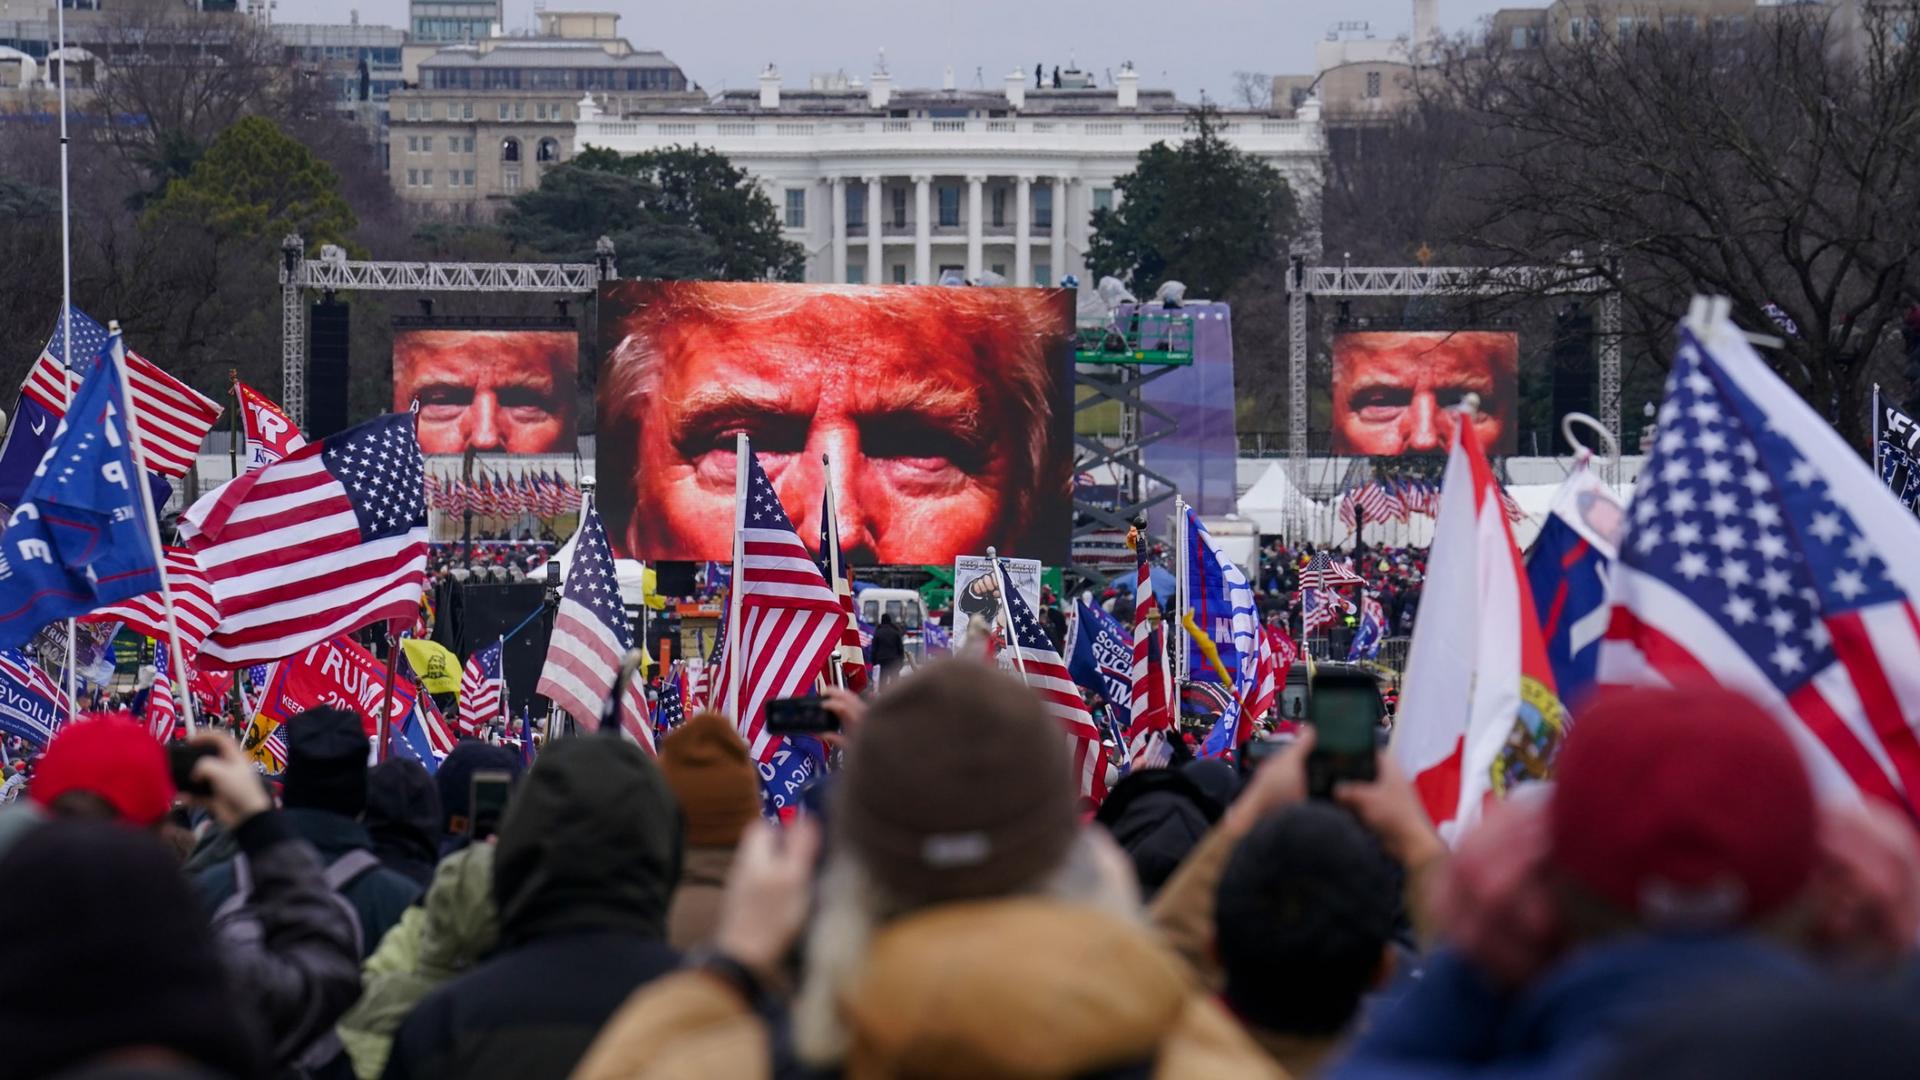 A large crowd of people are shown holding small US flags with screens showing Donald Trump's eyes in the distance.